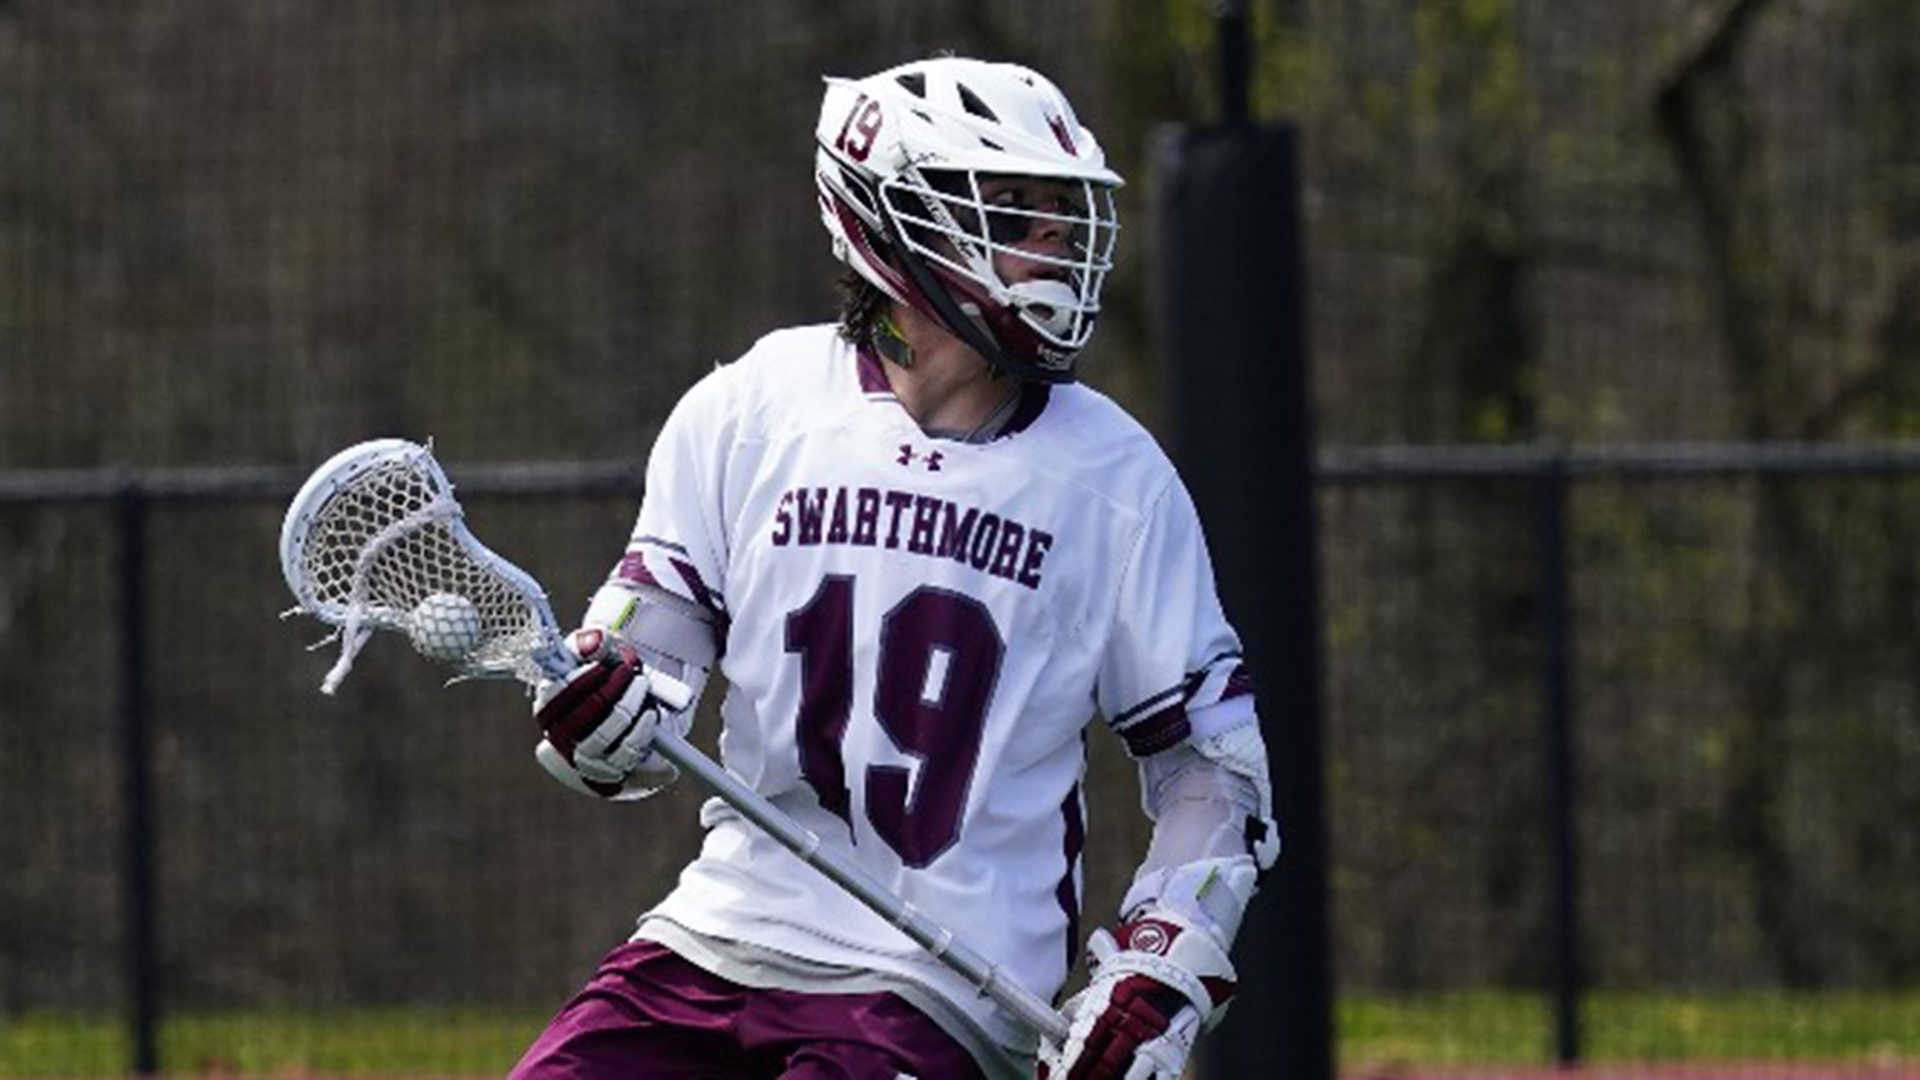 Von Mabbs, Swarthmore, Offensive Player of the Week